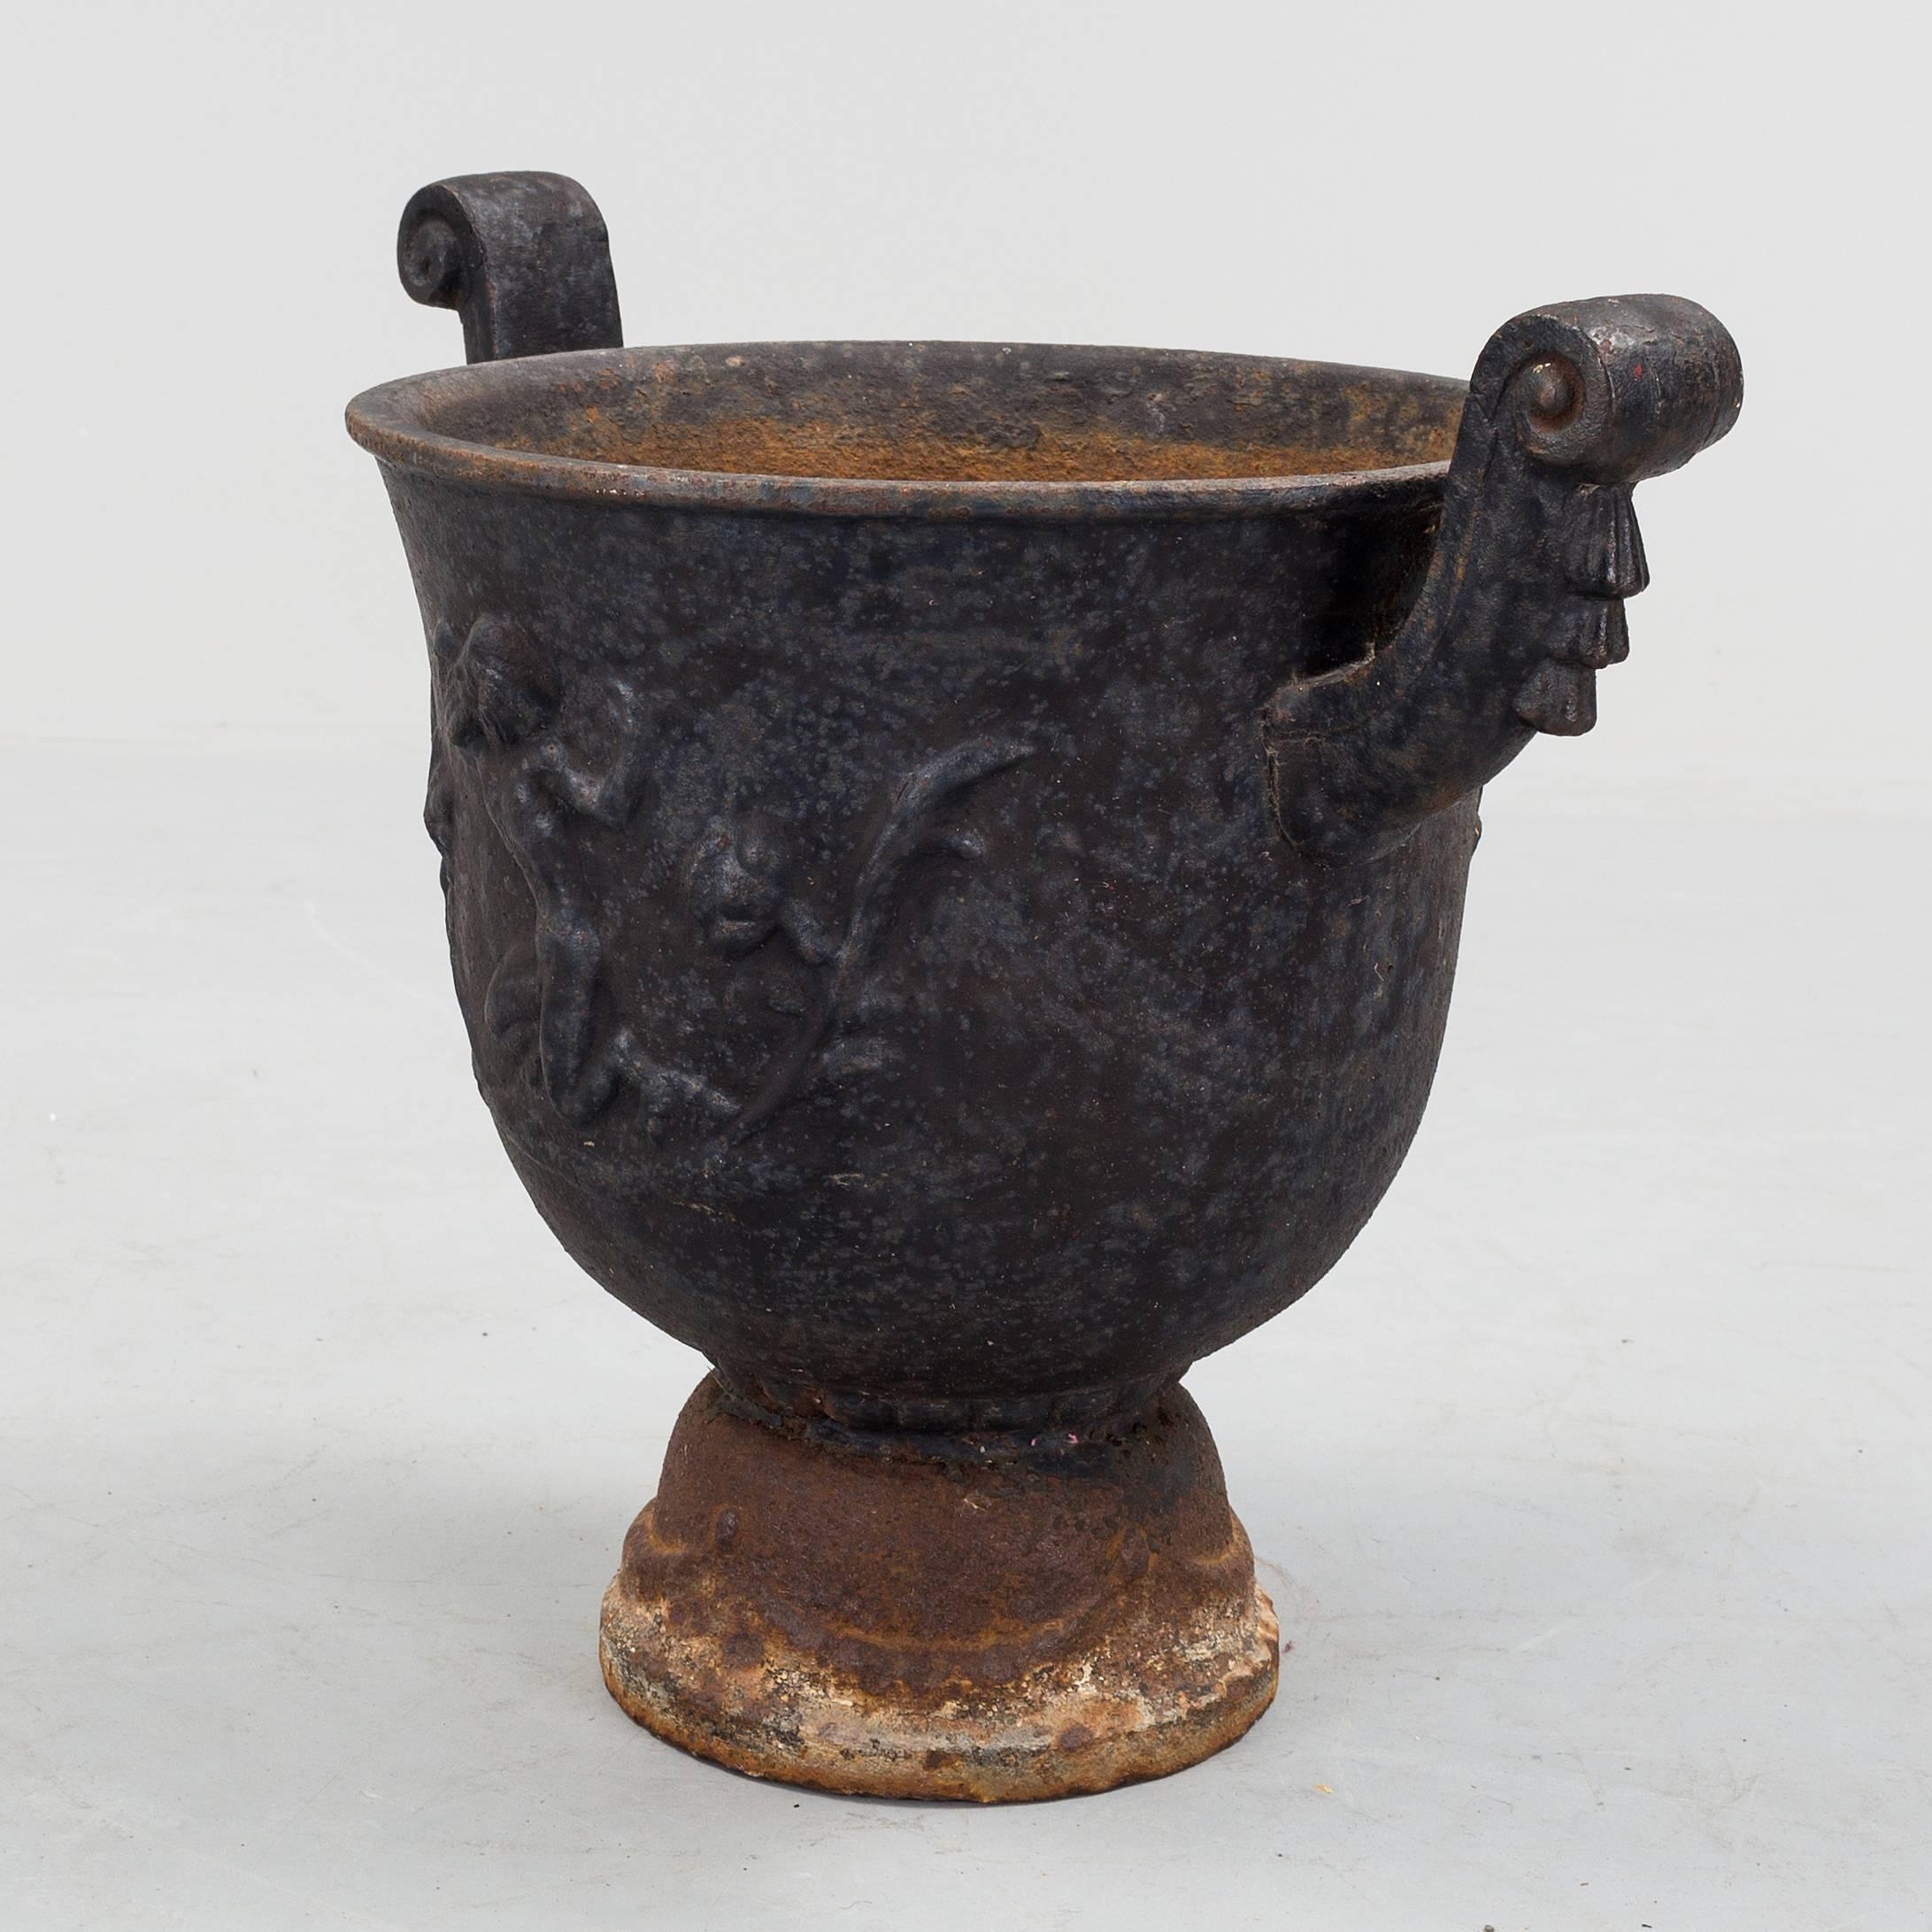 Cast iron garden urn designed by Ivar Johnsson (1885-1970) for Näfveqvarns Bruk, Sweden, circa 1930th.  3 urns available, price is for each.